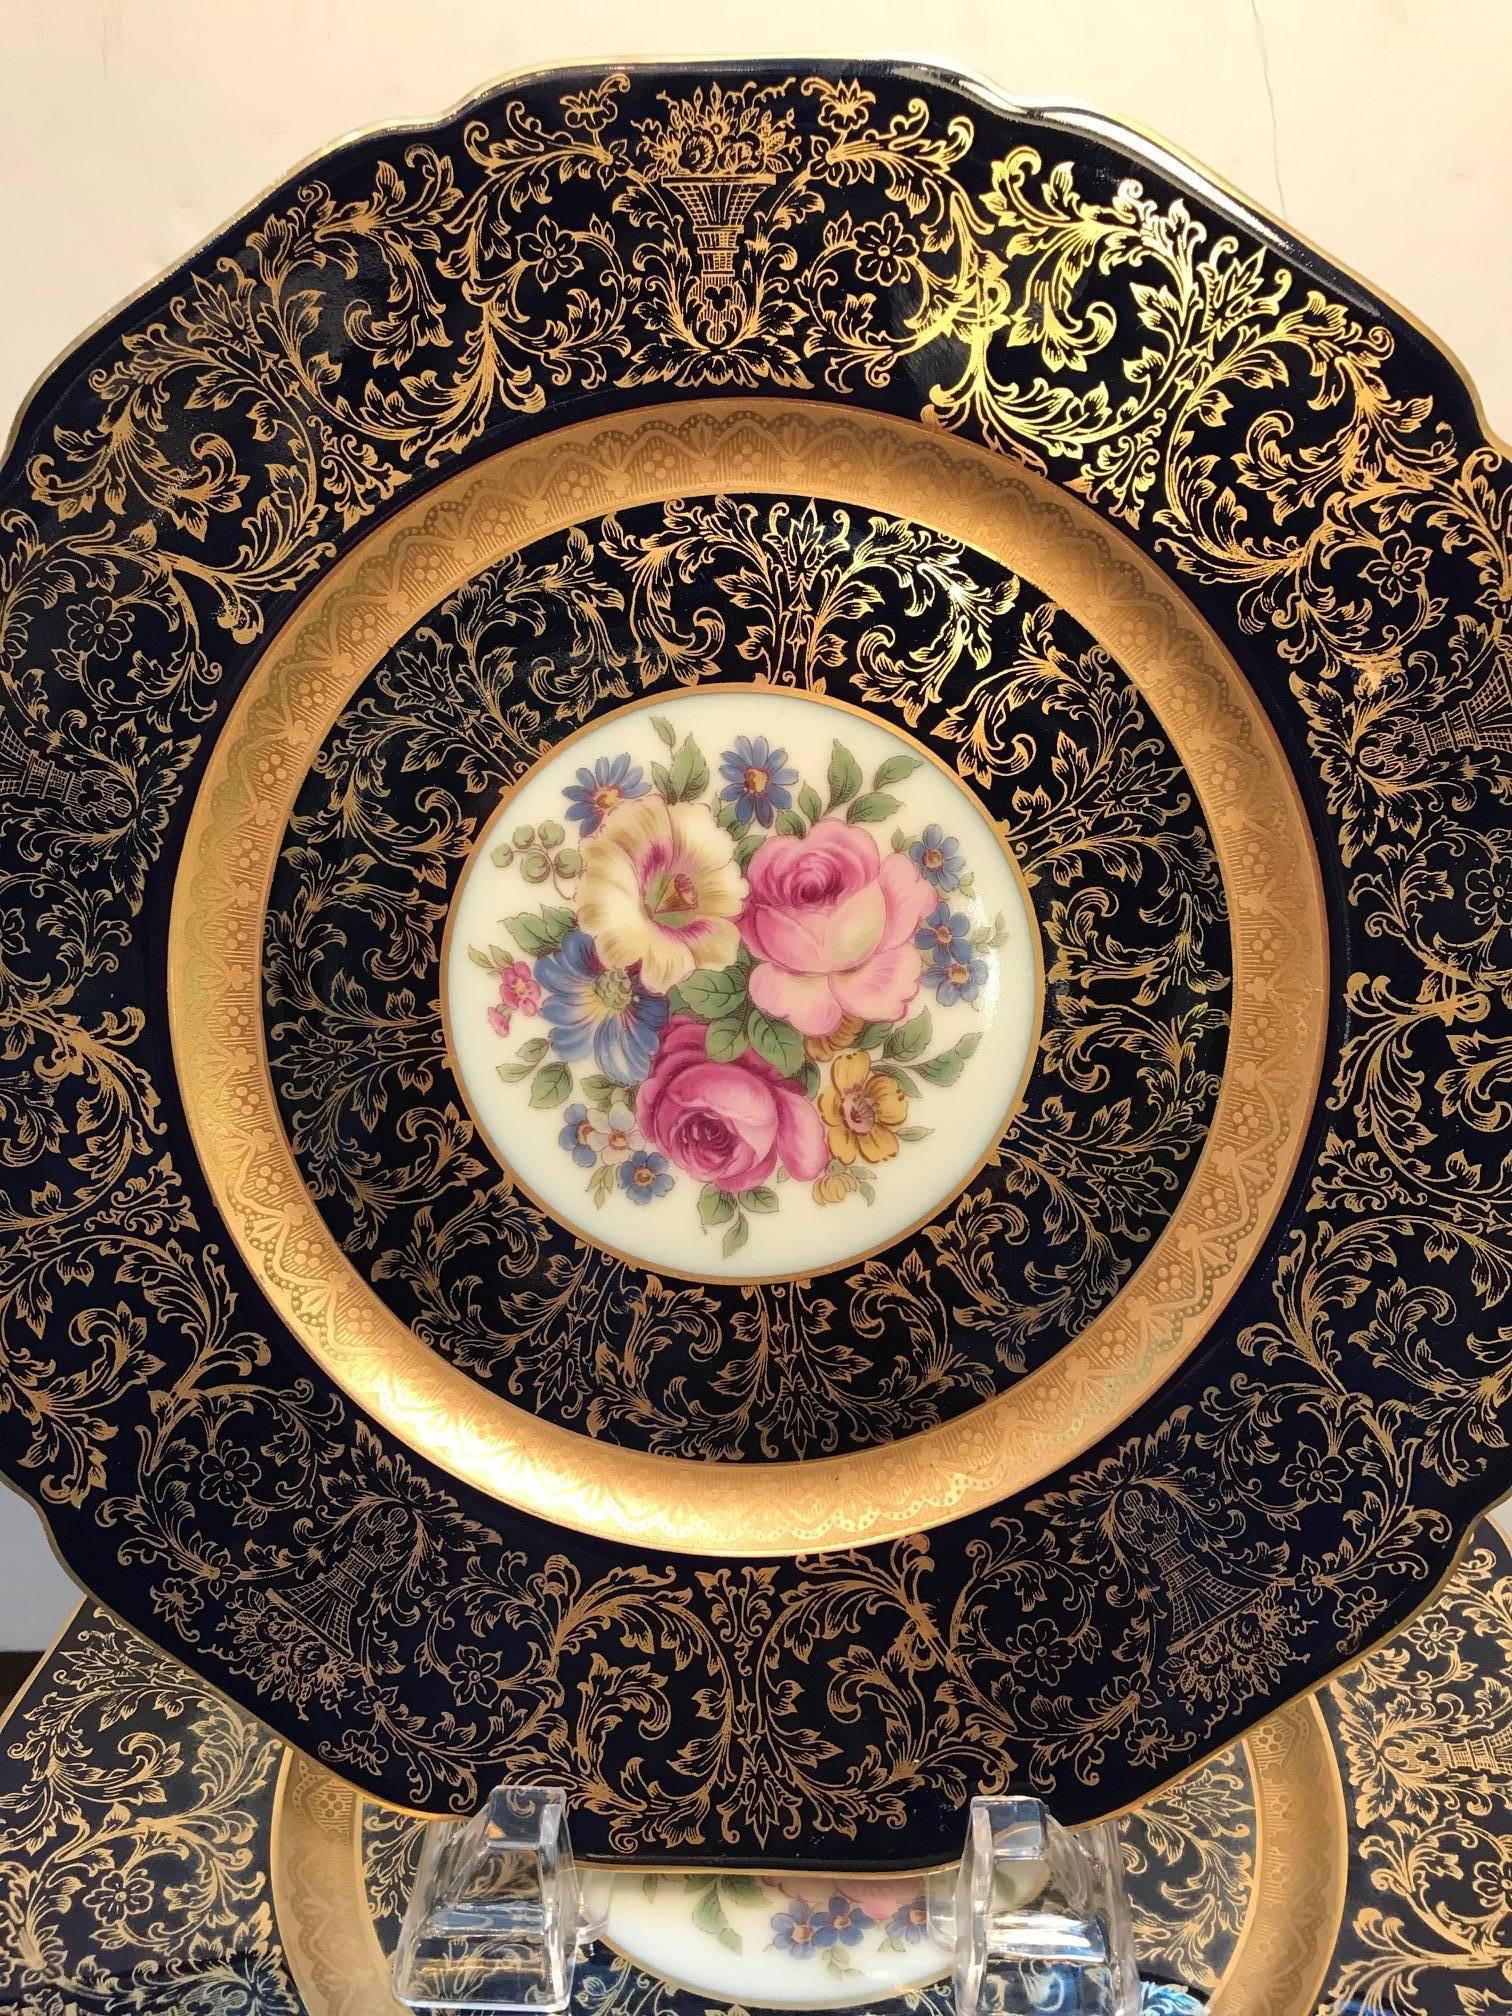 A set of cobalt blue with elaborate gilt border service plates. Double ring broad borders with central Dresden floral medallion. The plates are in unused cabinet condition with one plate having a slight scuff wear to the gilt border. Opulent and